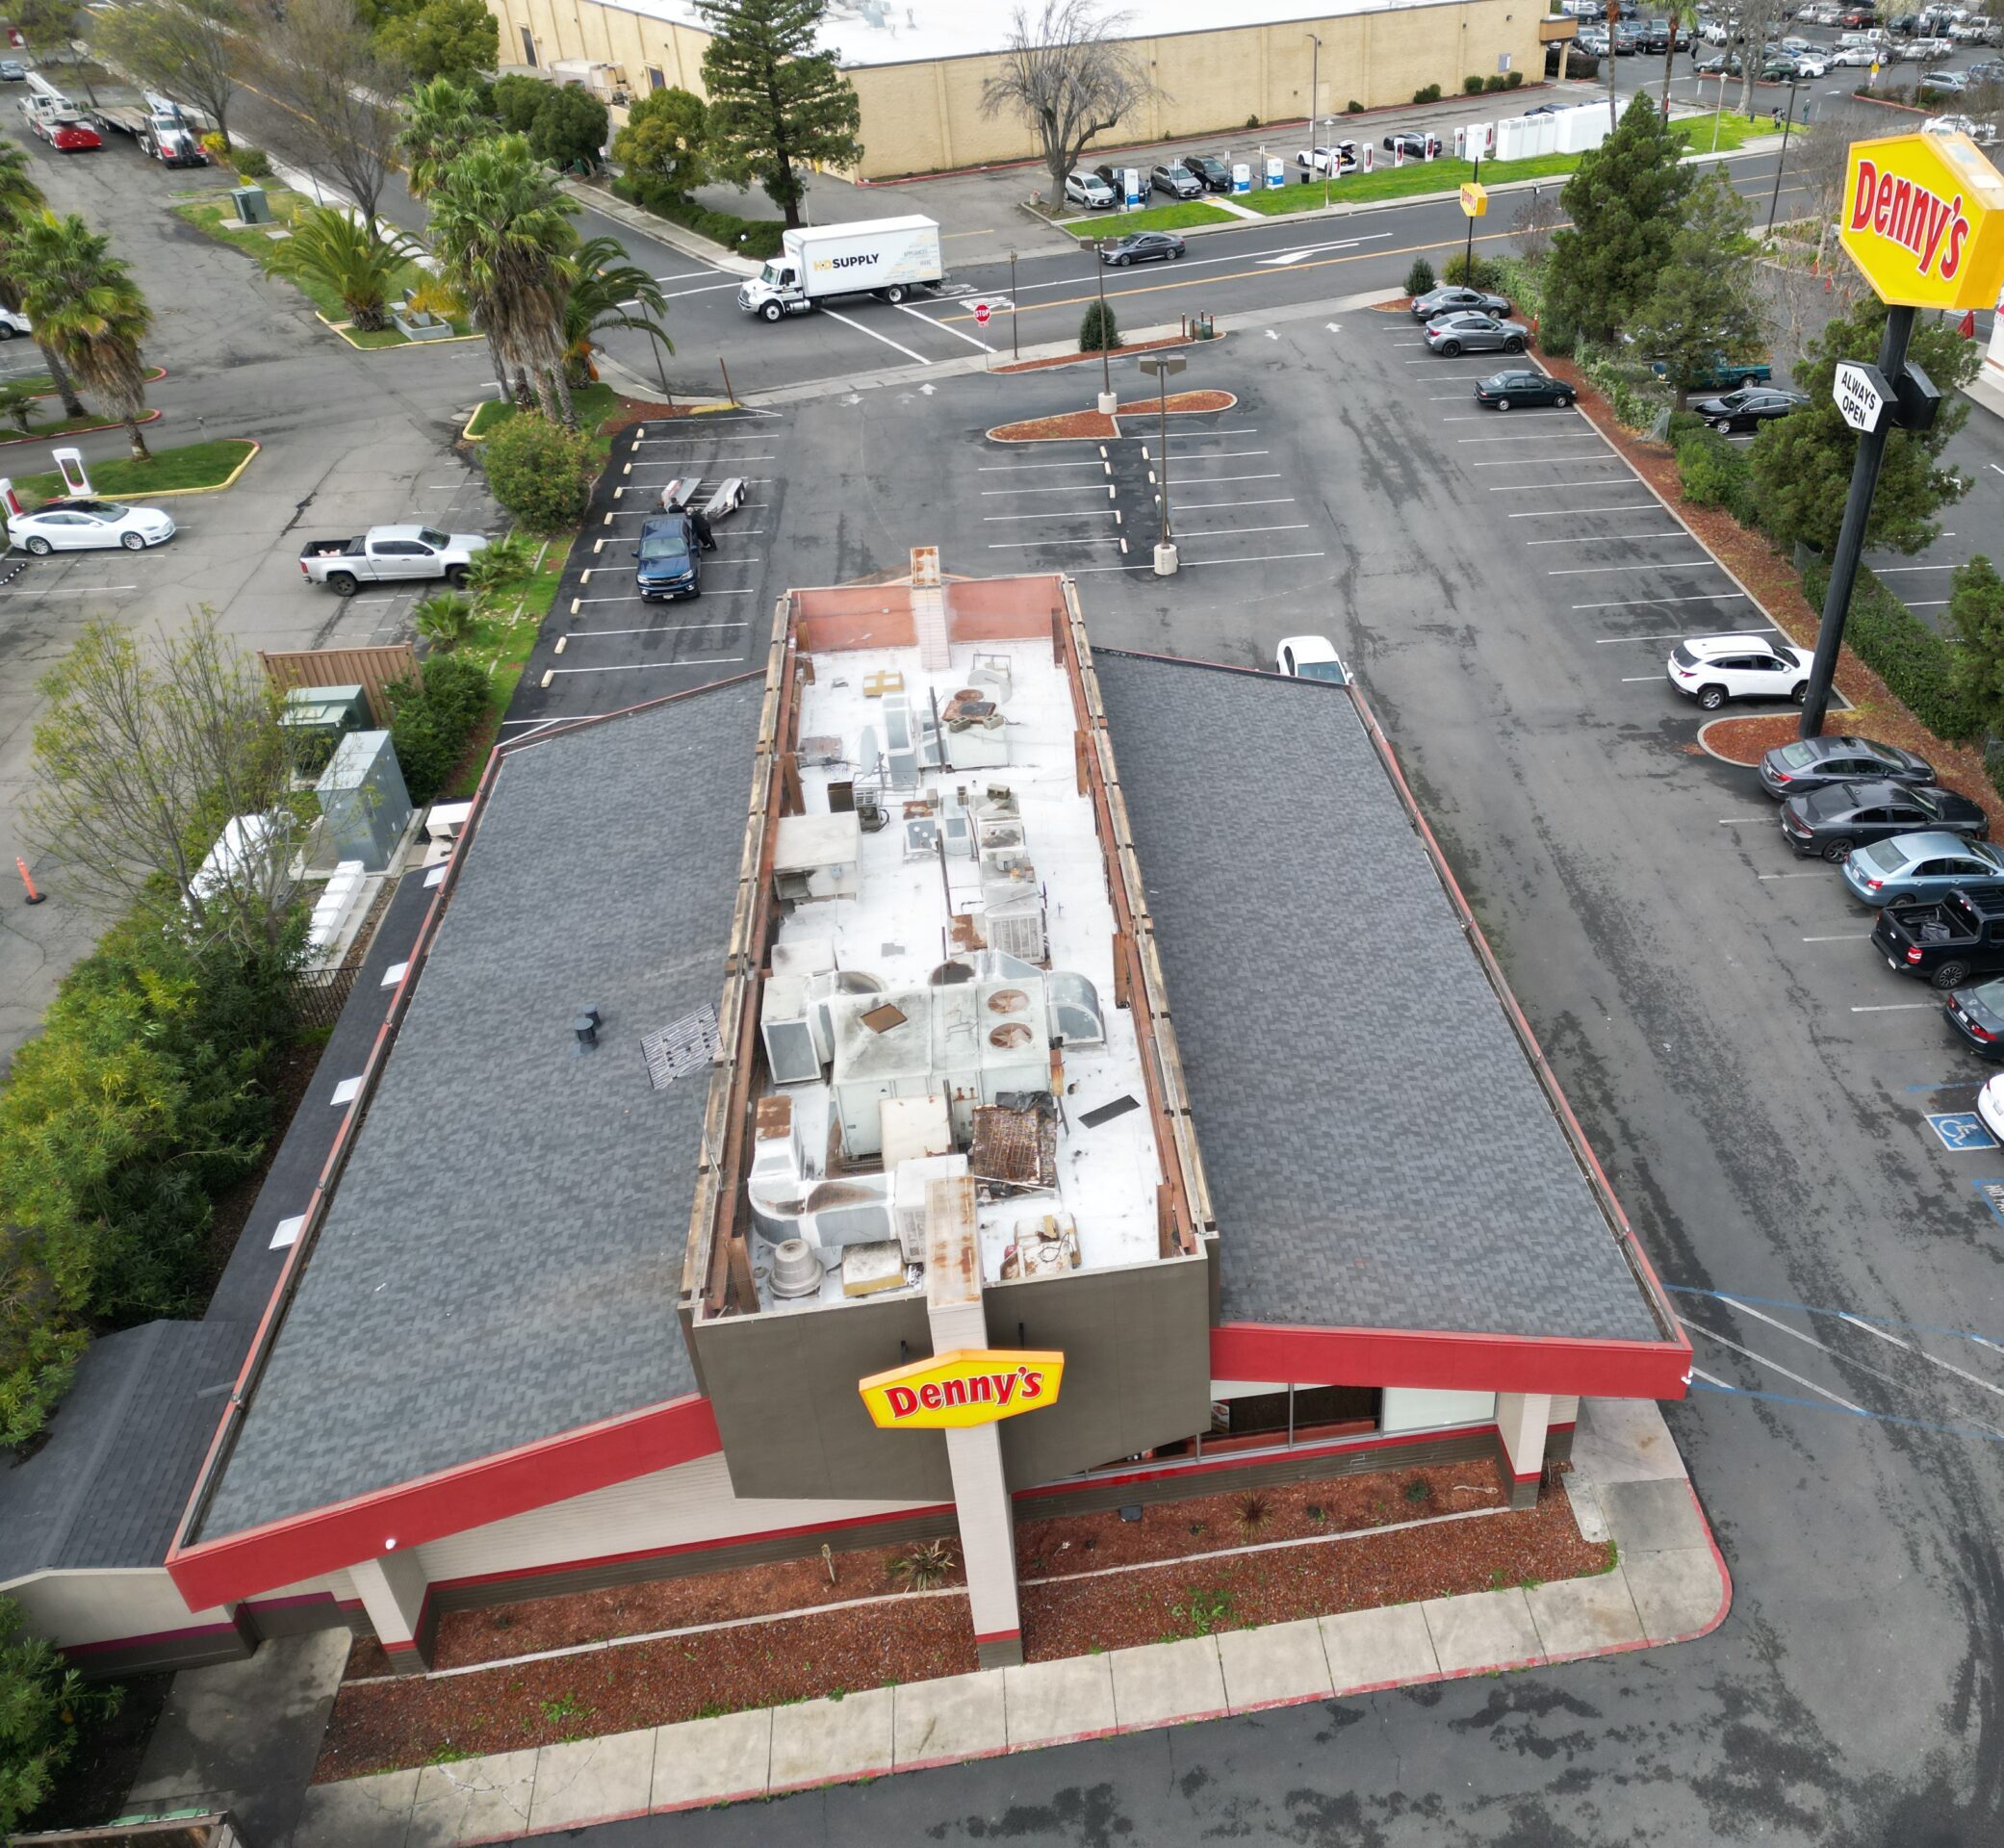 roof replacement composition asphalt shingle roof replacement new roof re-roof roofing contractor roofing company roof leak roofer reroof Vacaville Fairfield Suisun Benicia Vallejo Rio Vista Concord Dixon Davis Woodland local roofer roof leak Silicone coating roof replacement new roof re-roof roofing contractor roofing company roofer reroof